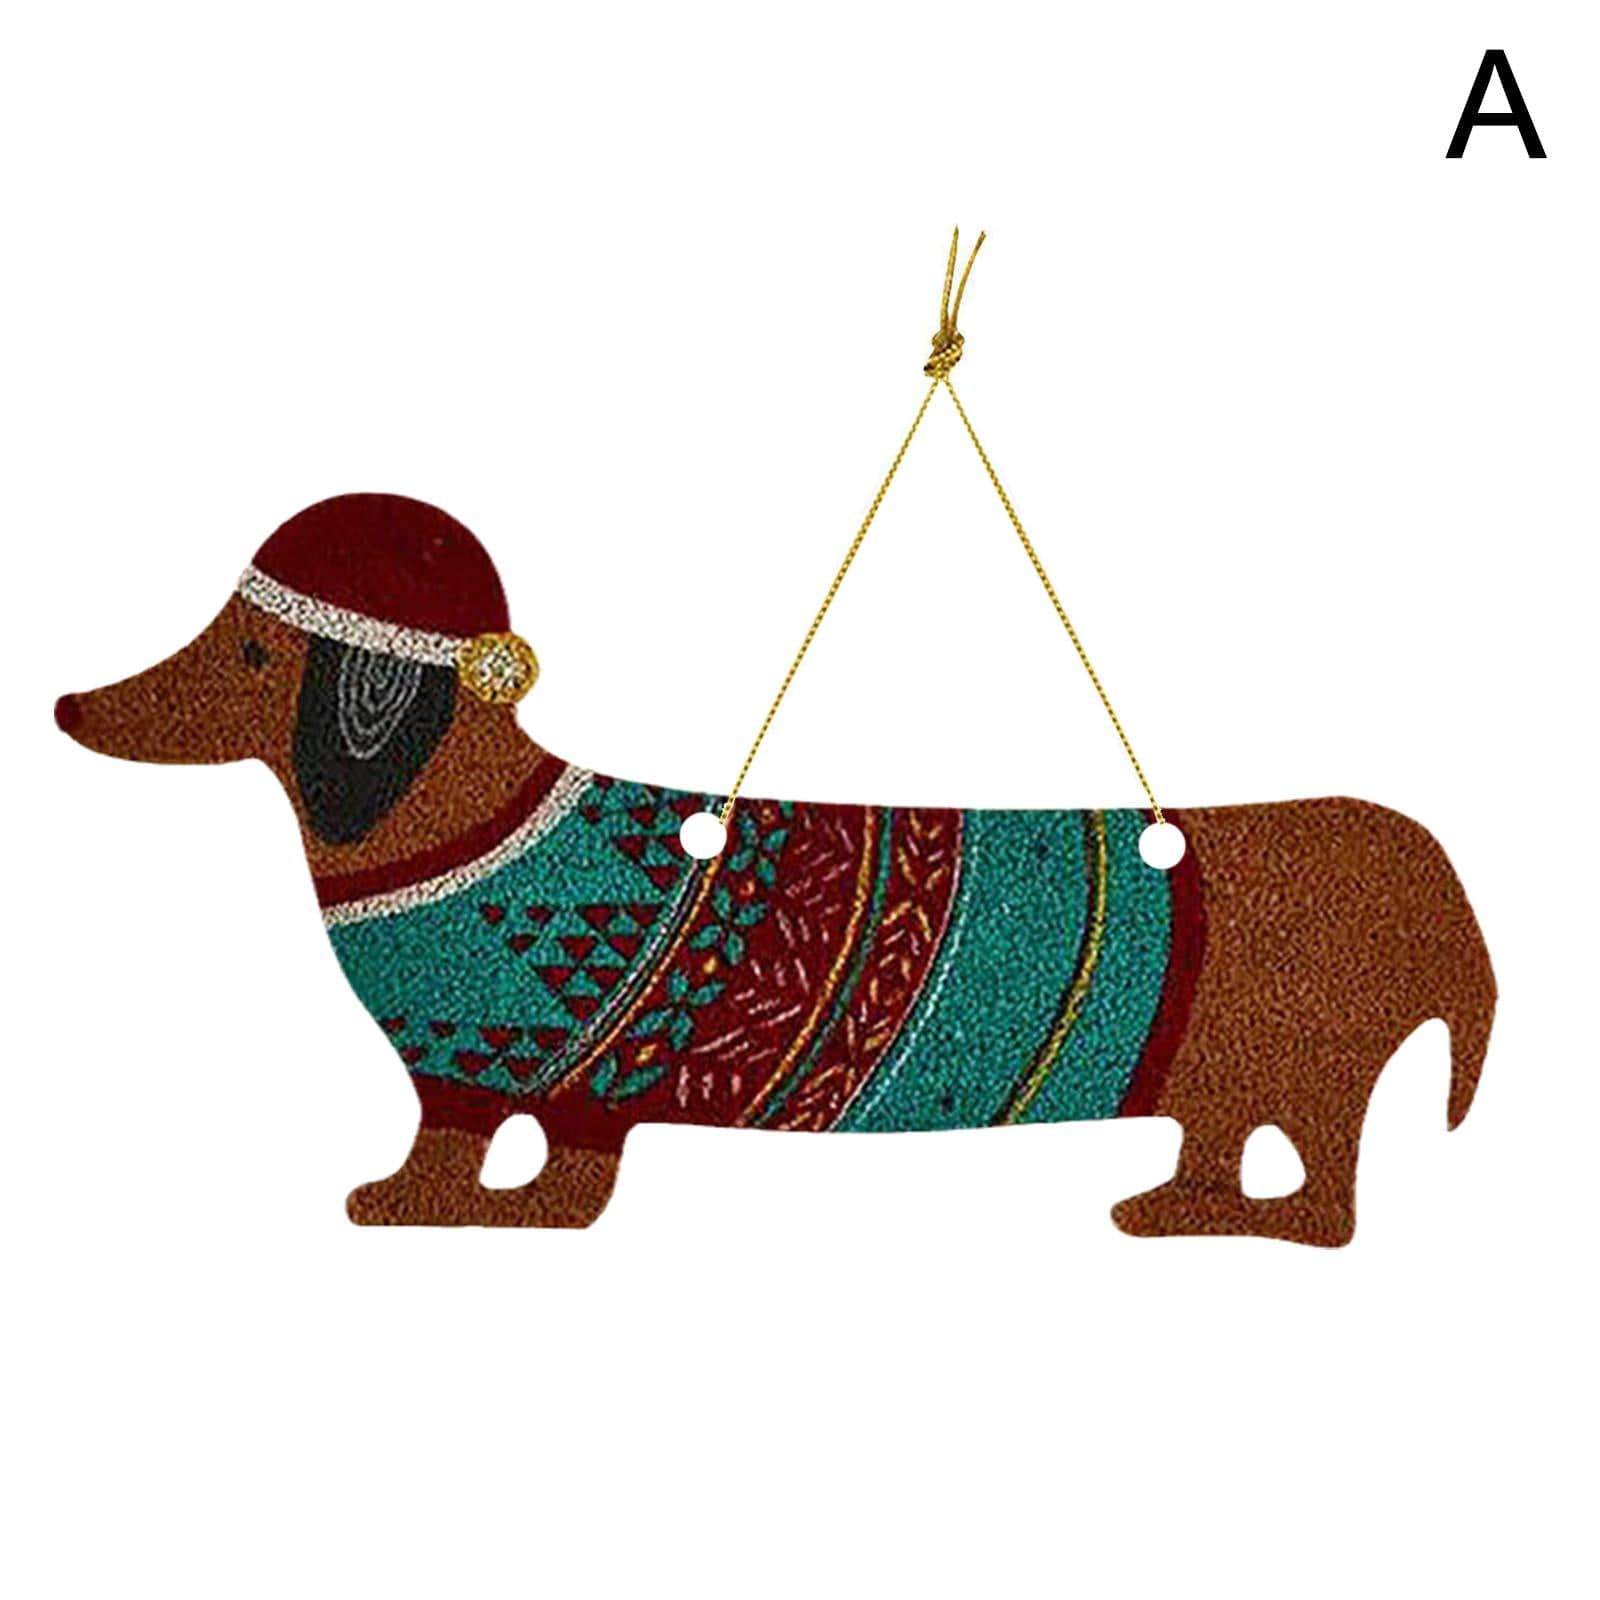 Hello Sausage Dachshund Ornaments A - 4 pieces The Doxie World